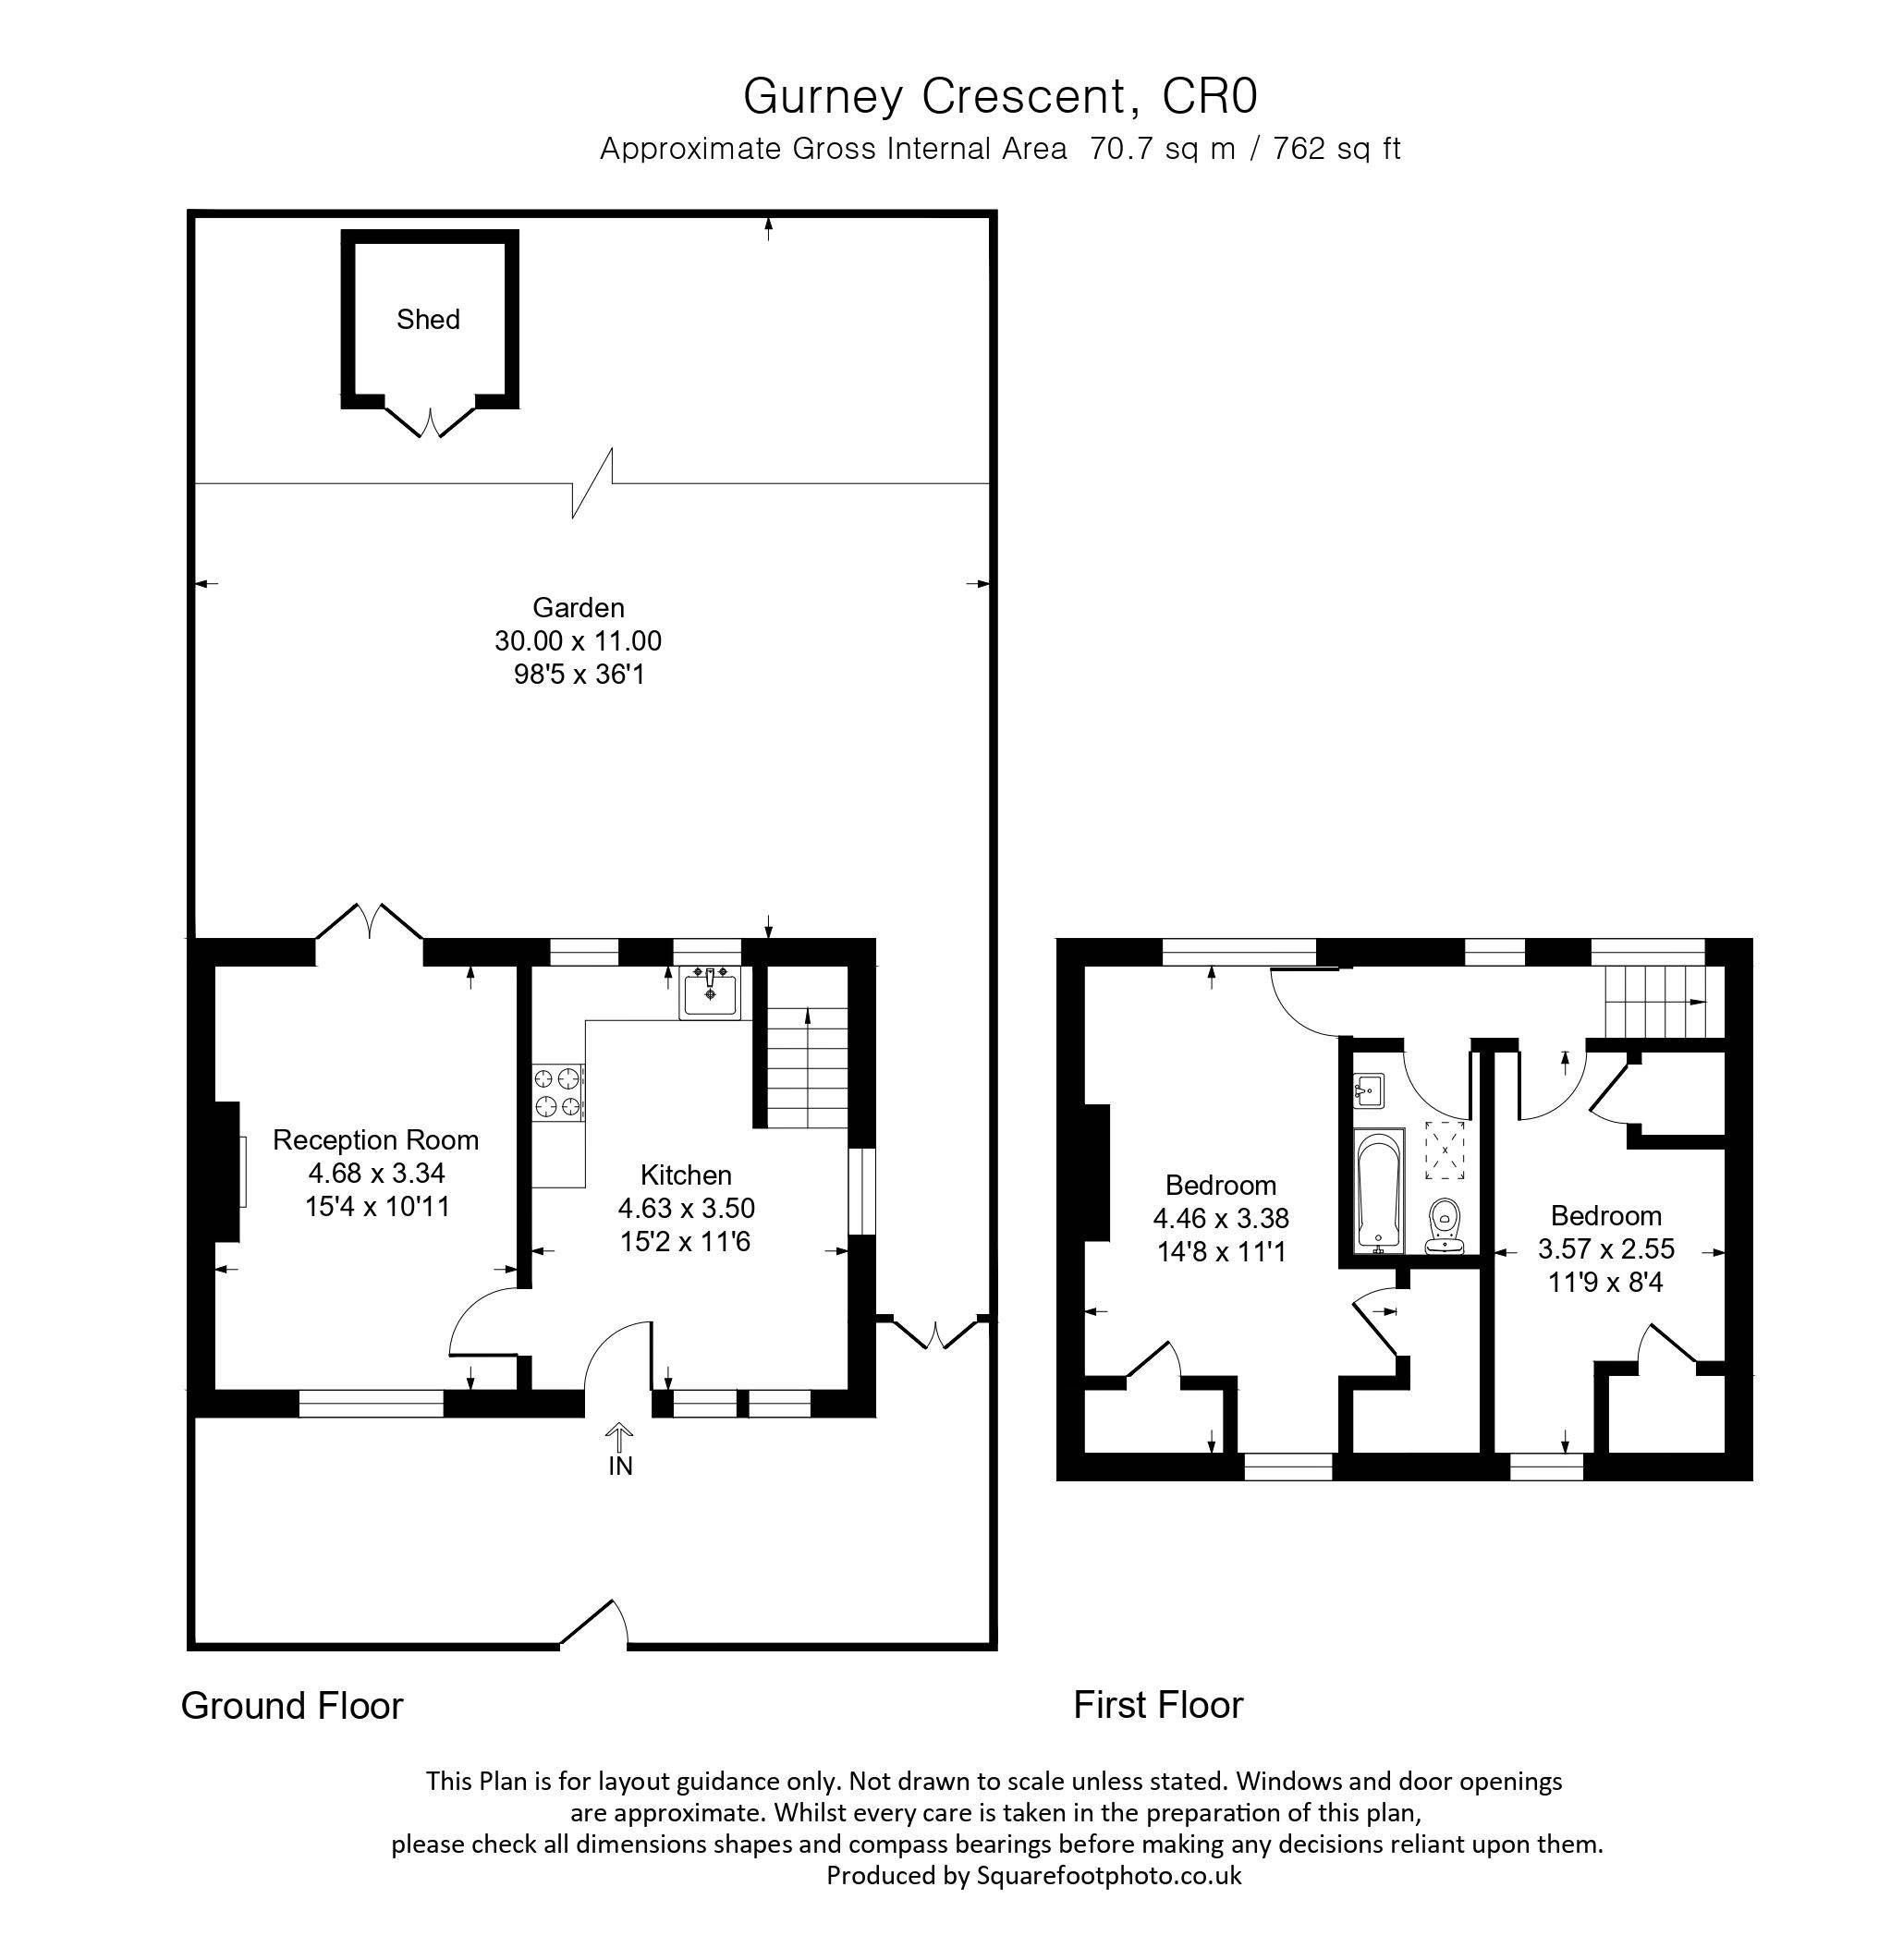 2 bed end of terrace house for sale in Gurney Crescent, Croydon - Property floorplan